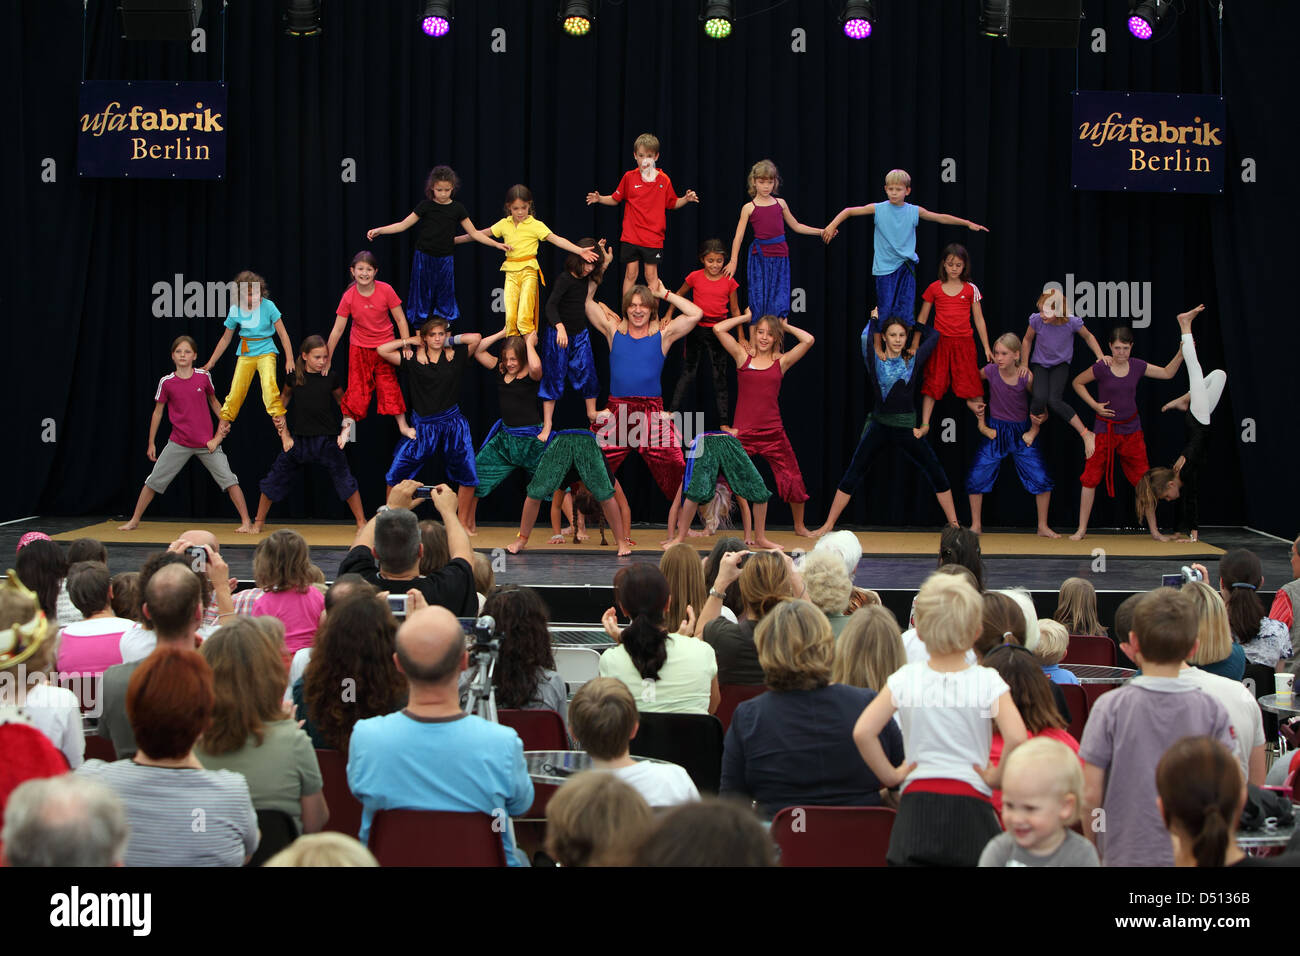 Berlin, Germany, children's show with a performance in the Ufa Fabrik their acrobatics Stock Photo